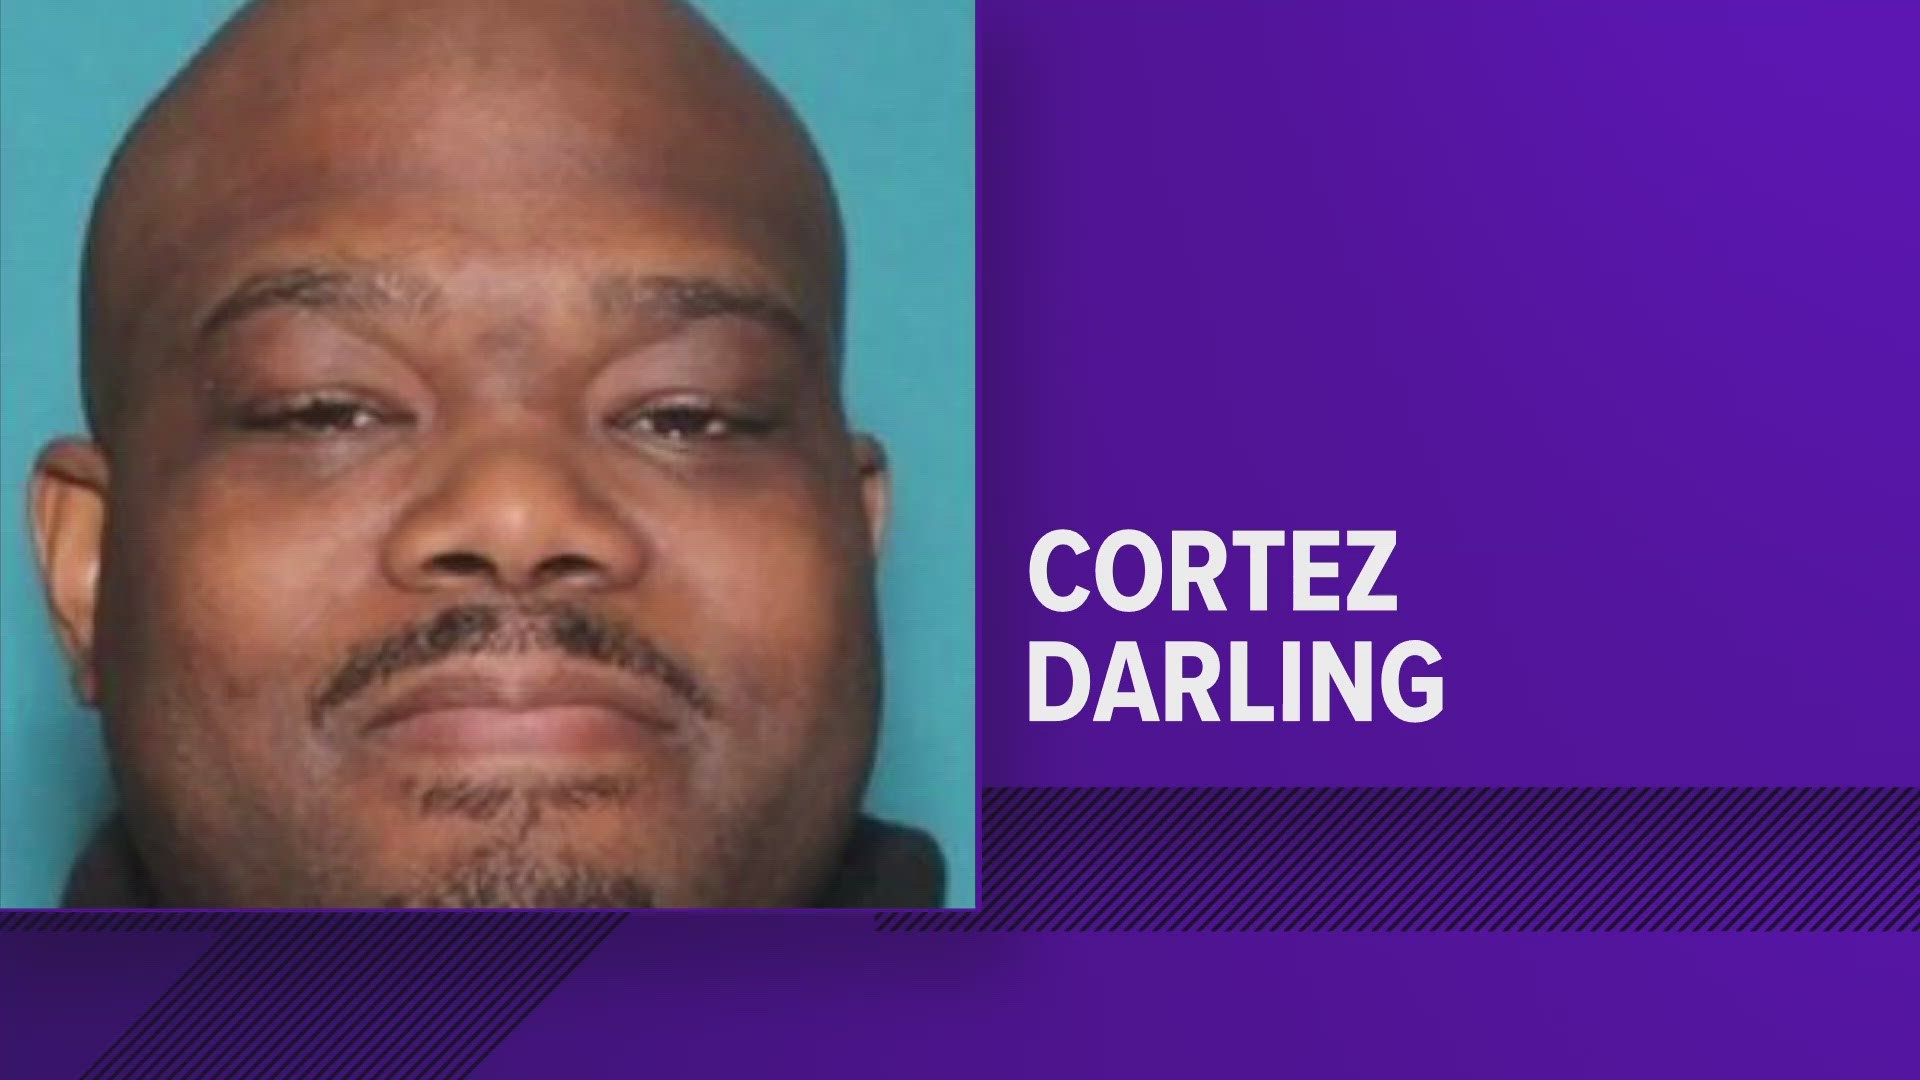 Southaven Police said Cortez Darling is charged with attempted murder and drive-by shooting.